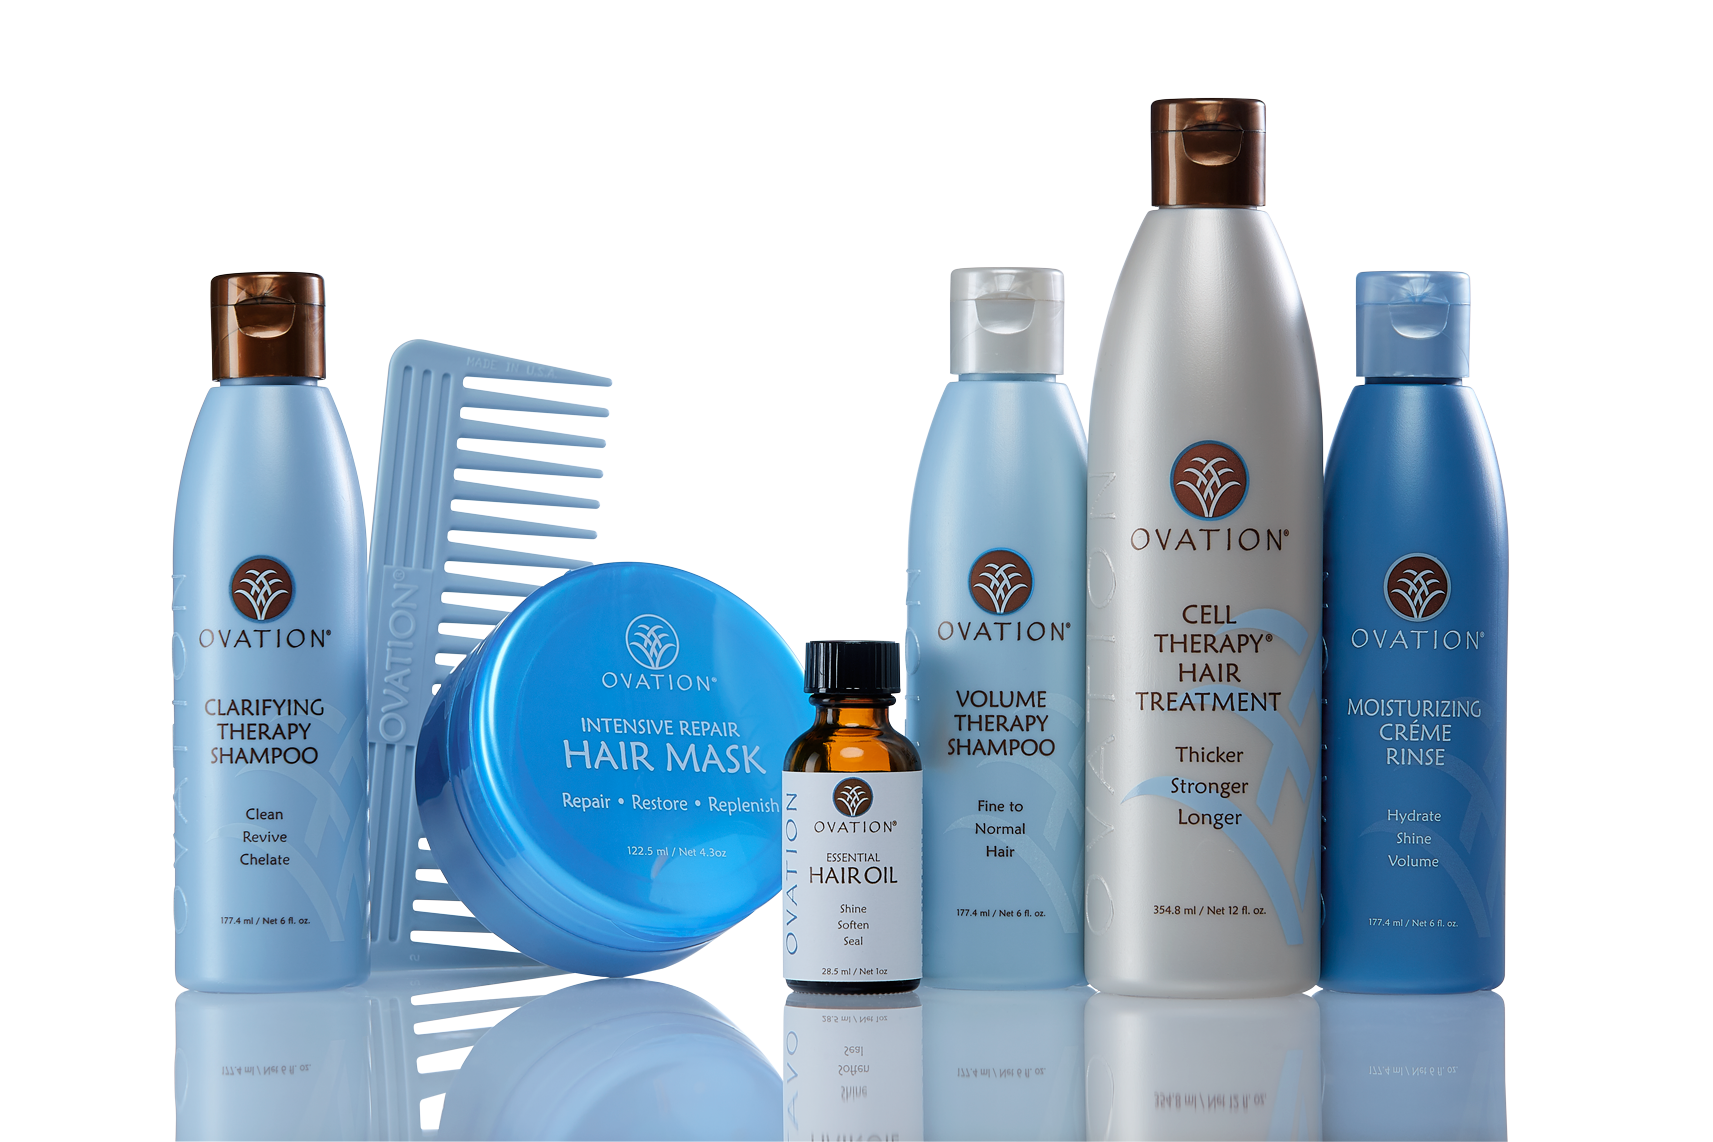 OVATION Hair® Makes the Gift of Giving Easier this Holiday Season